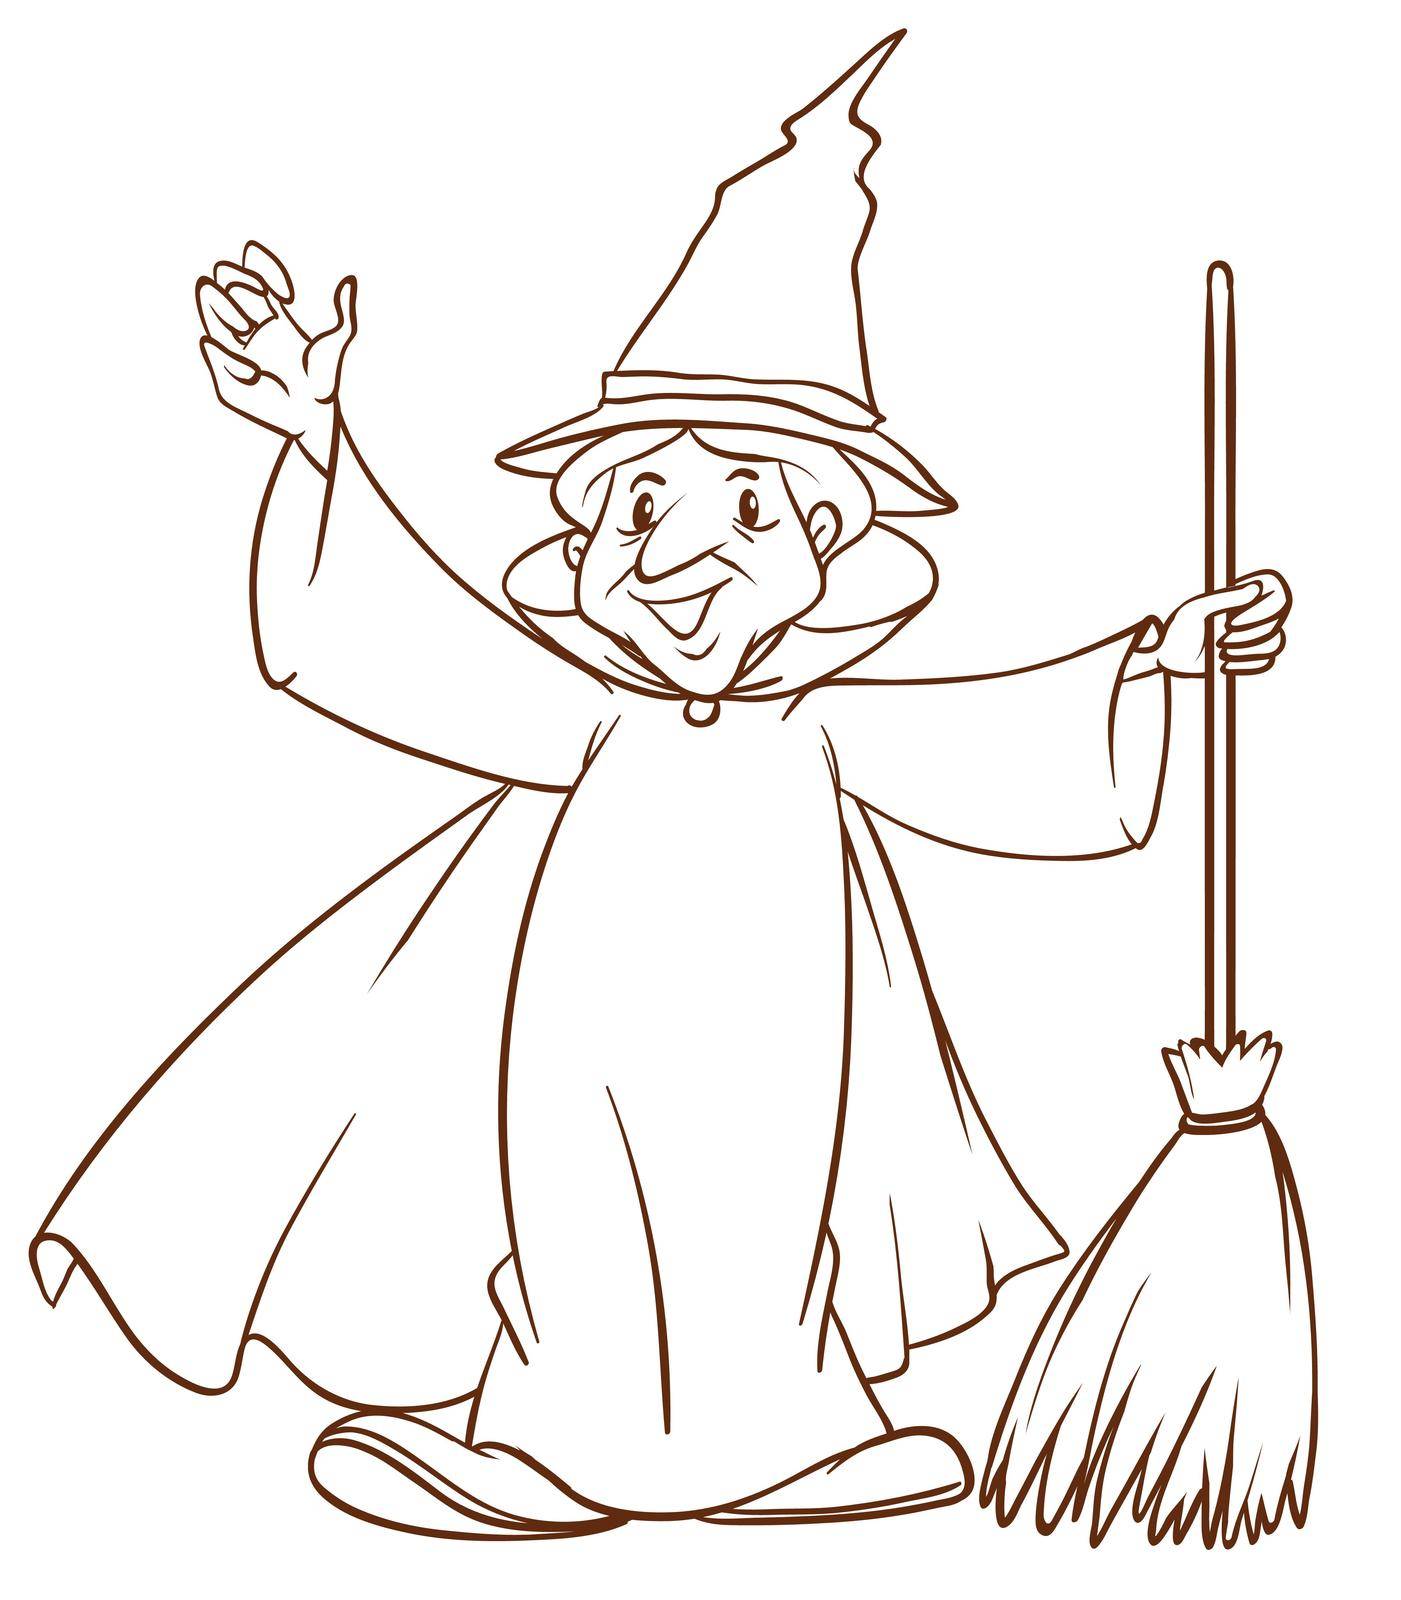 Illustration of a simple sketch of a wizard on a white background